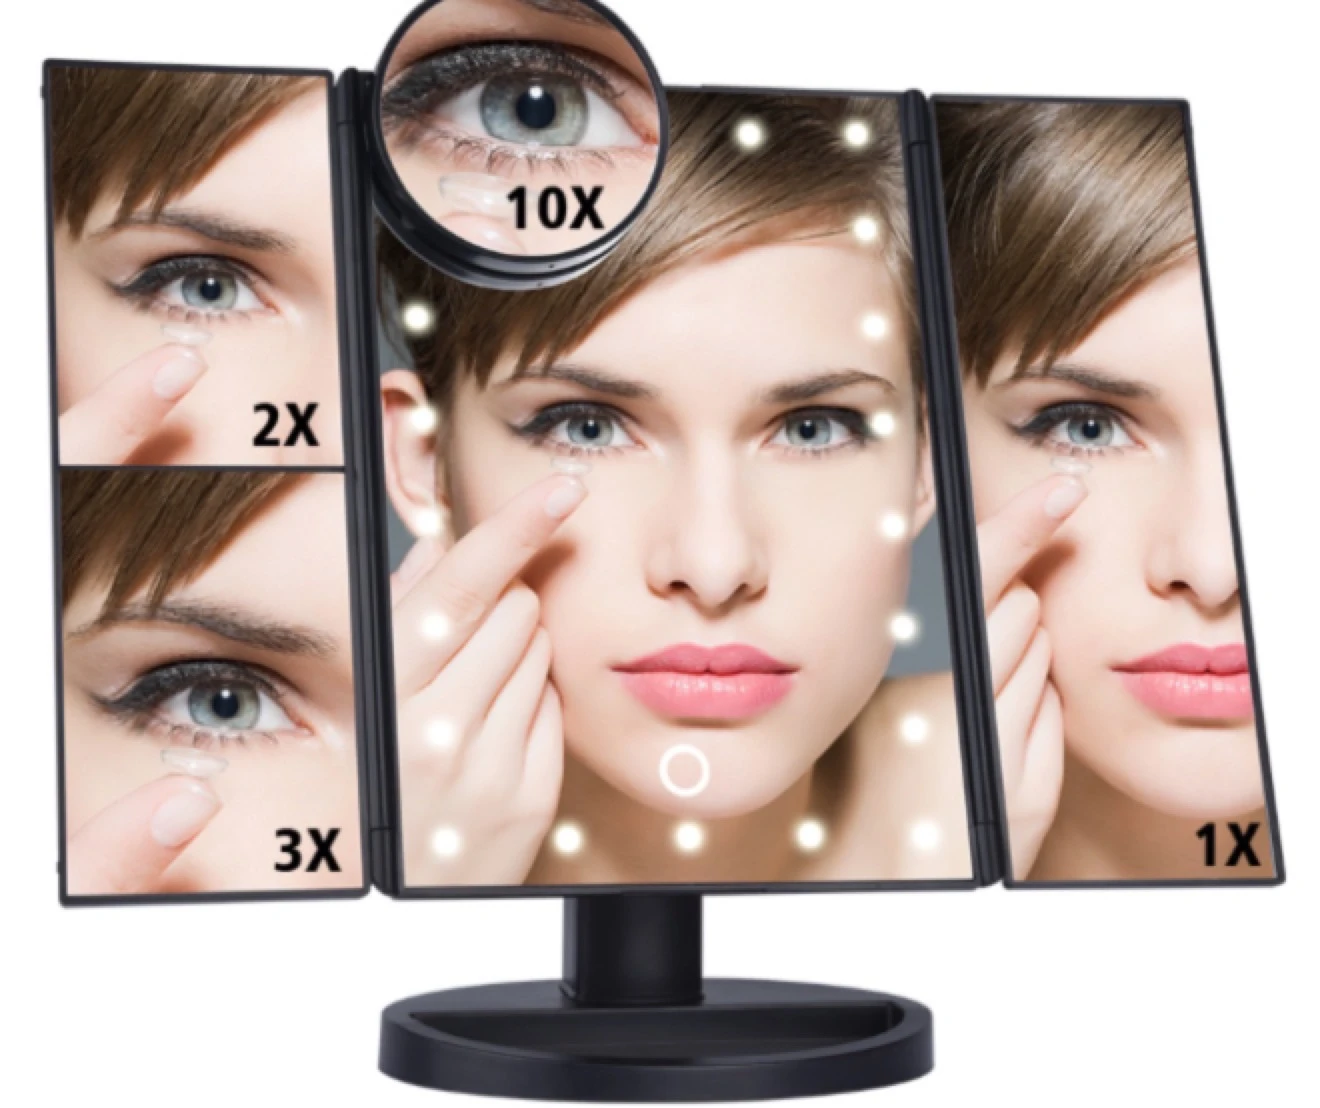 New intelligent cosmetic makeup espelho custom logo 10x magnified led vannity cosmetics mirror with stand